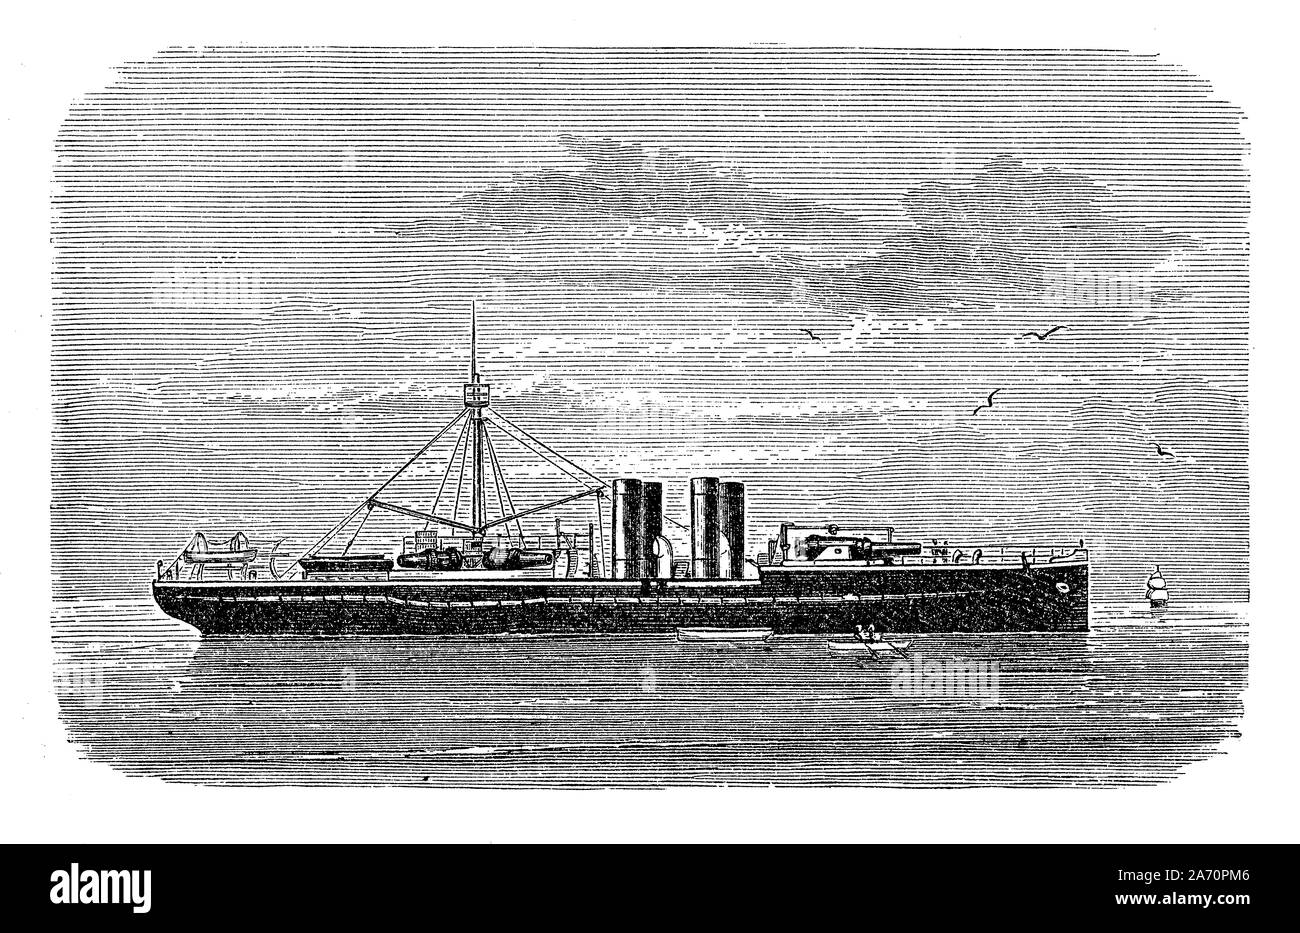 SMS Sachsen  ironclad of the Imperial German navy launched in 1877 for coastal defense with two steam engines and 6 guns Stock Photo